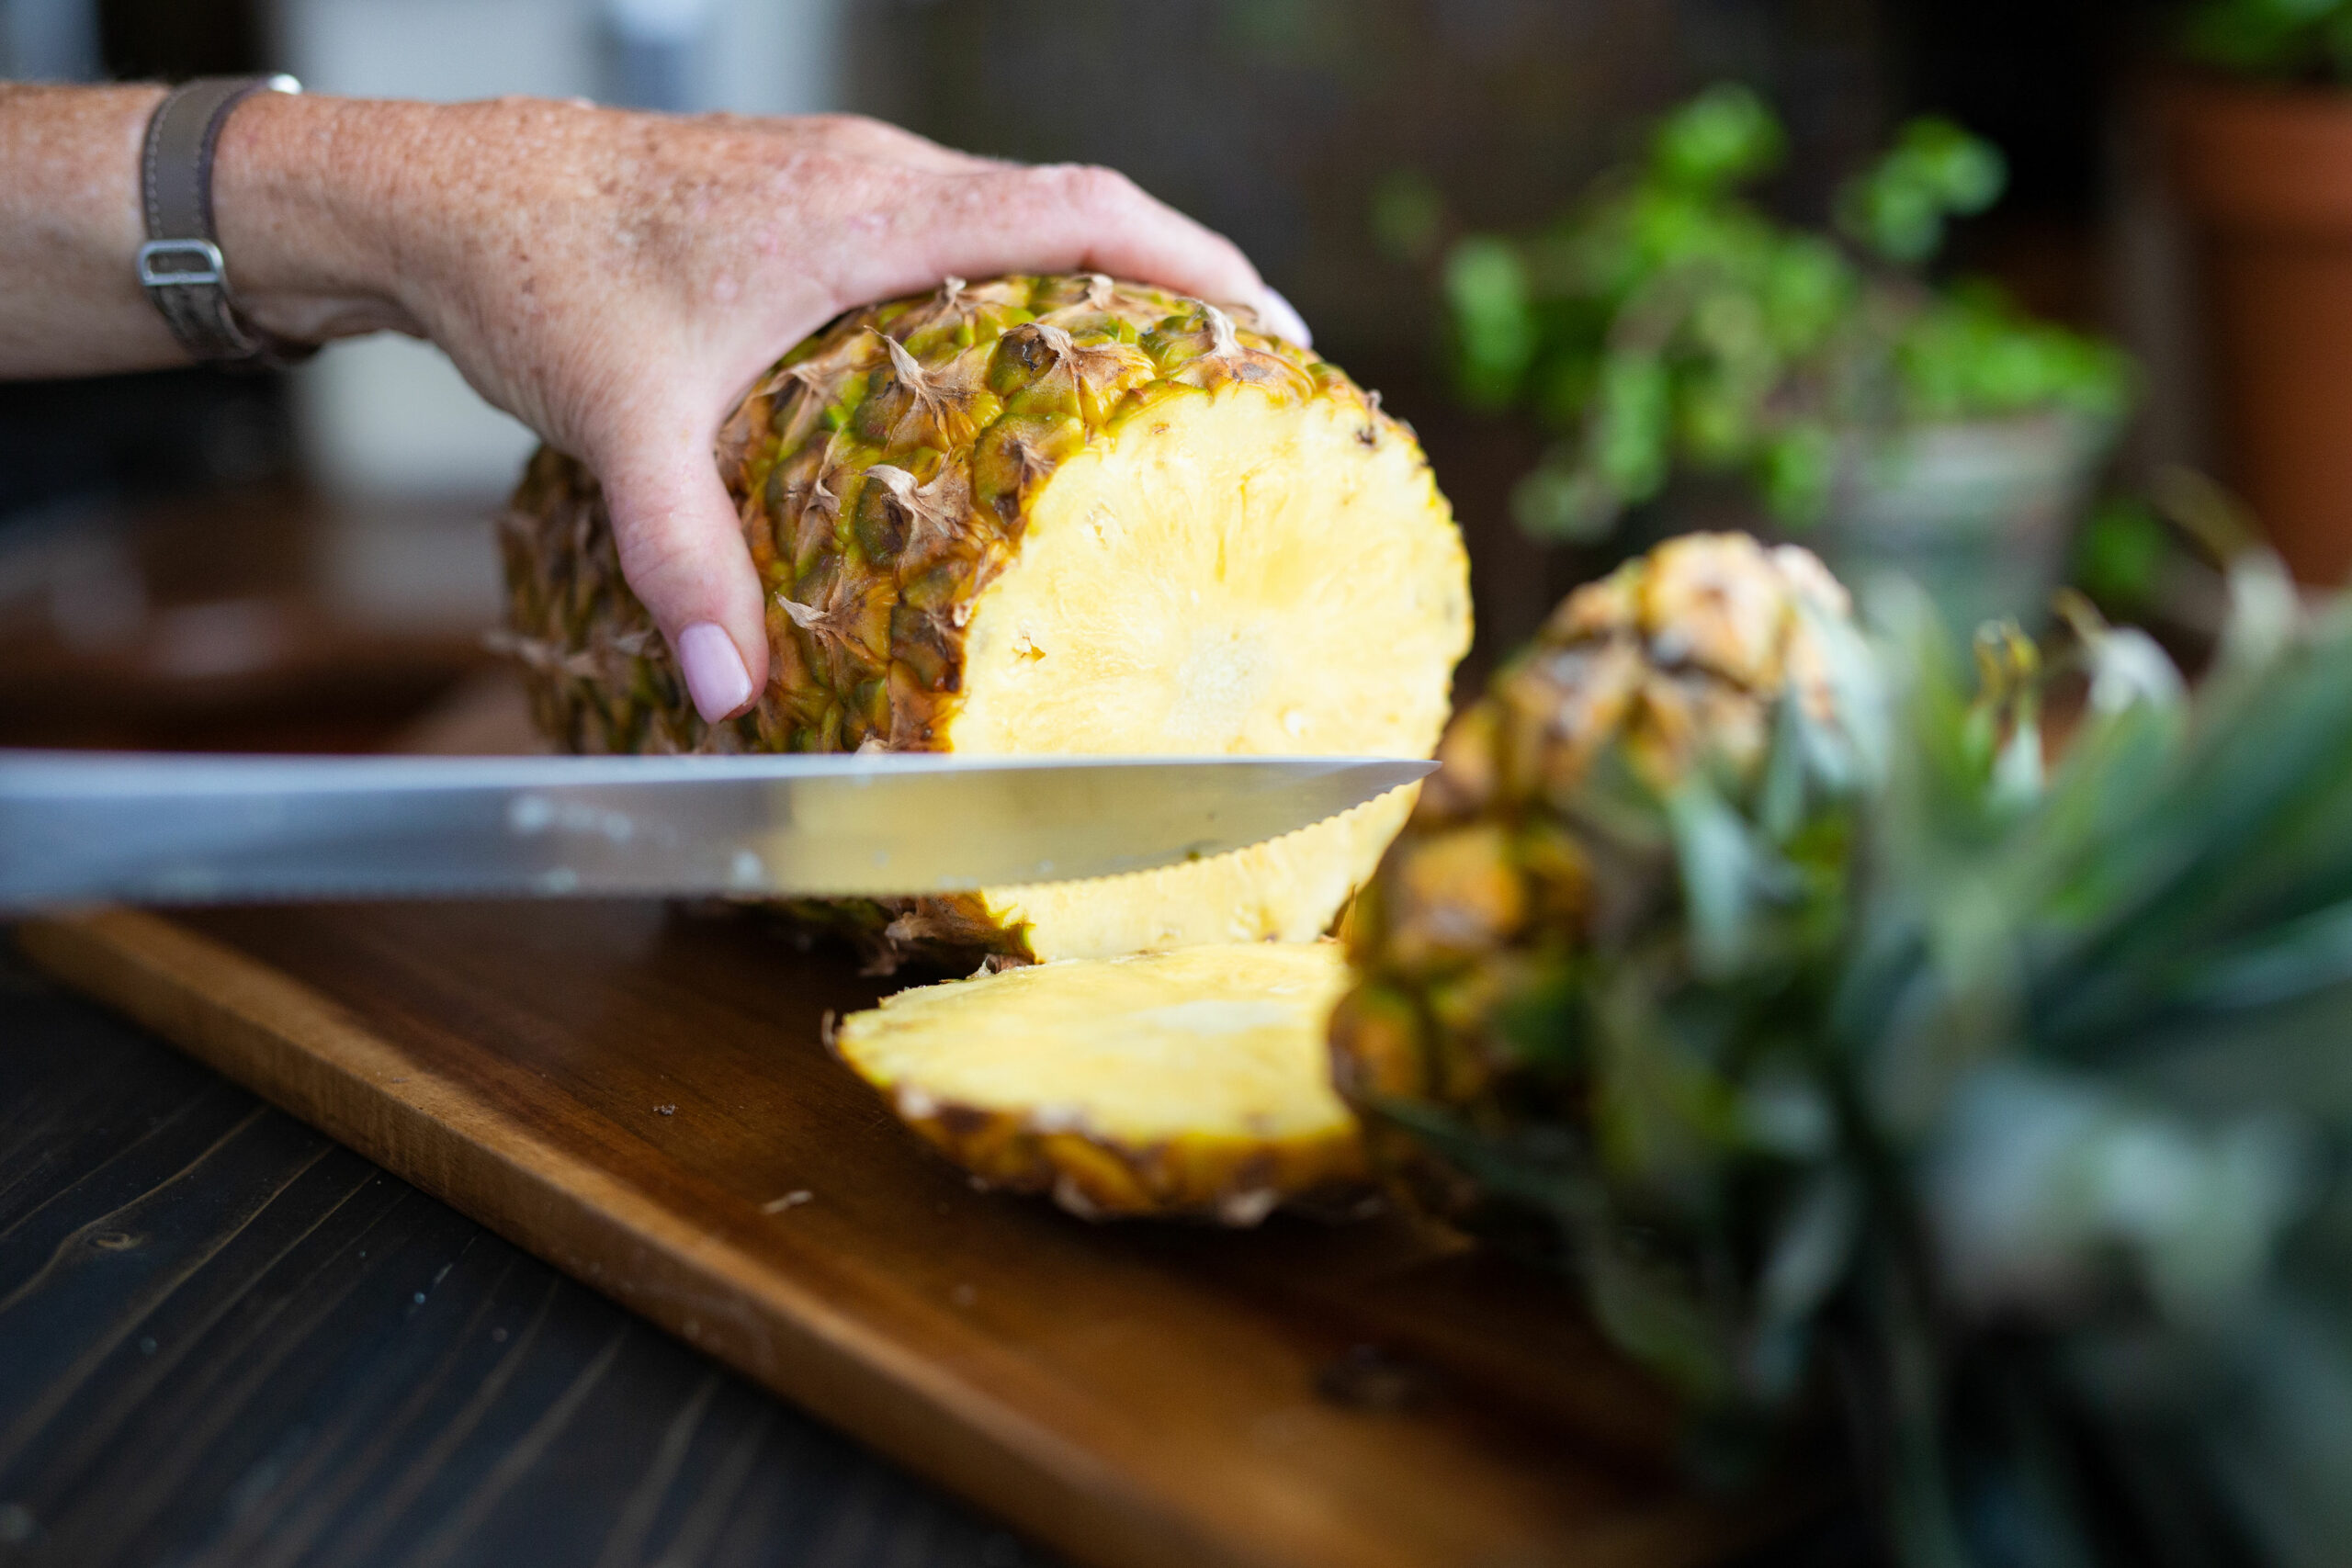 Cutting a pineapple